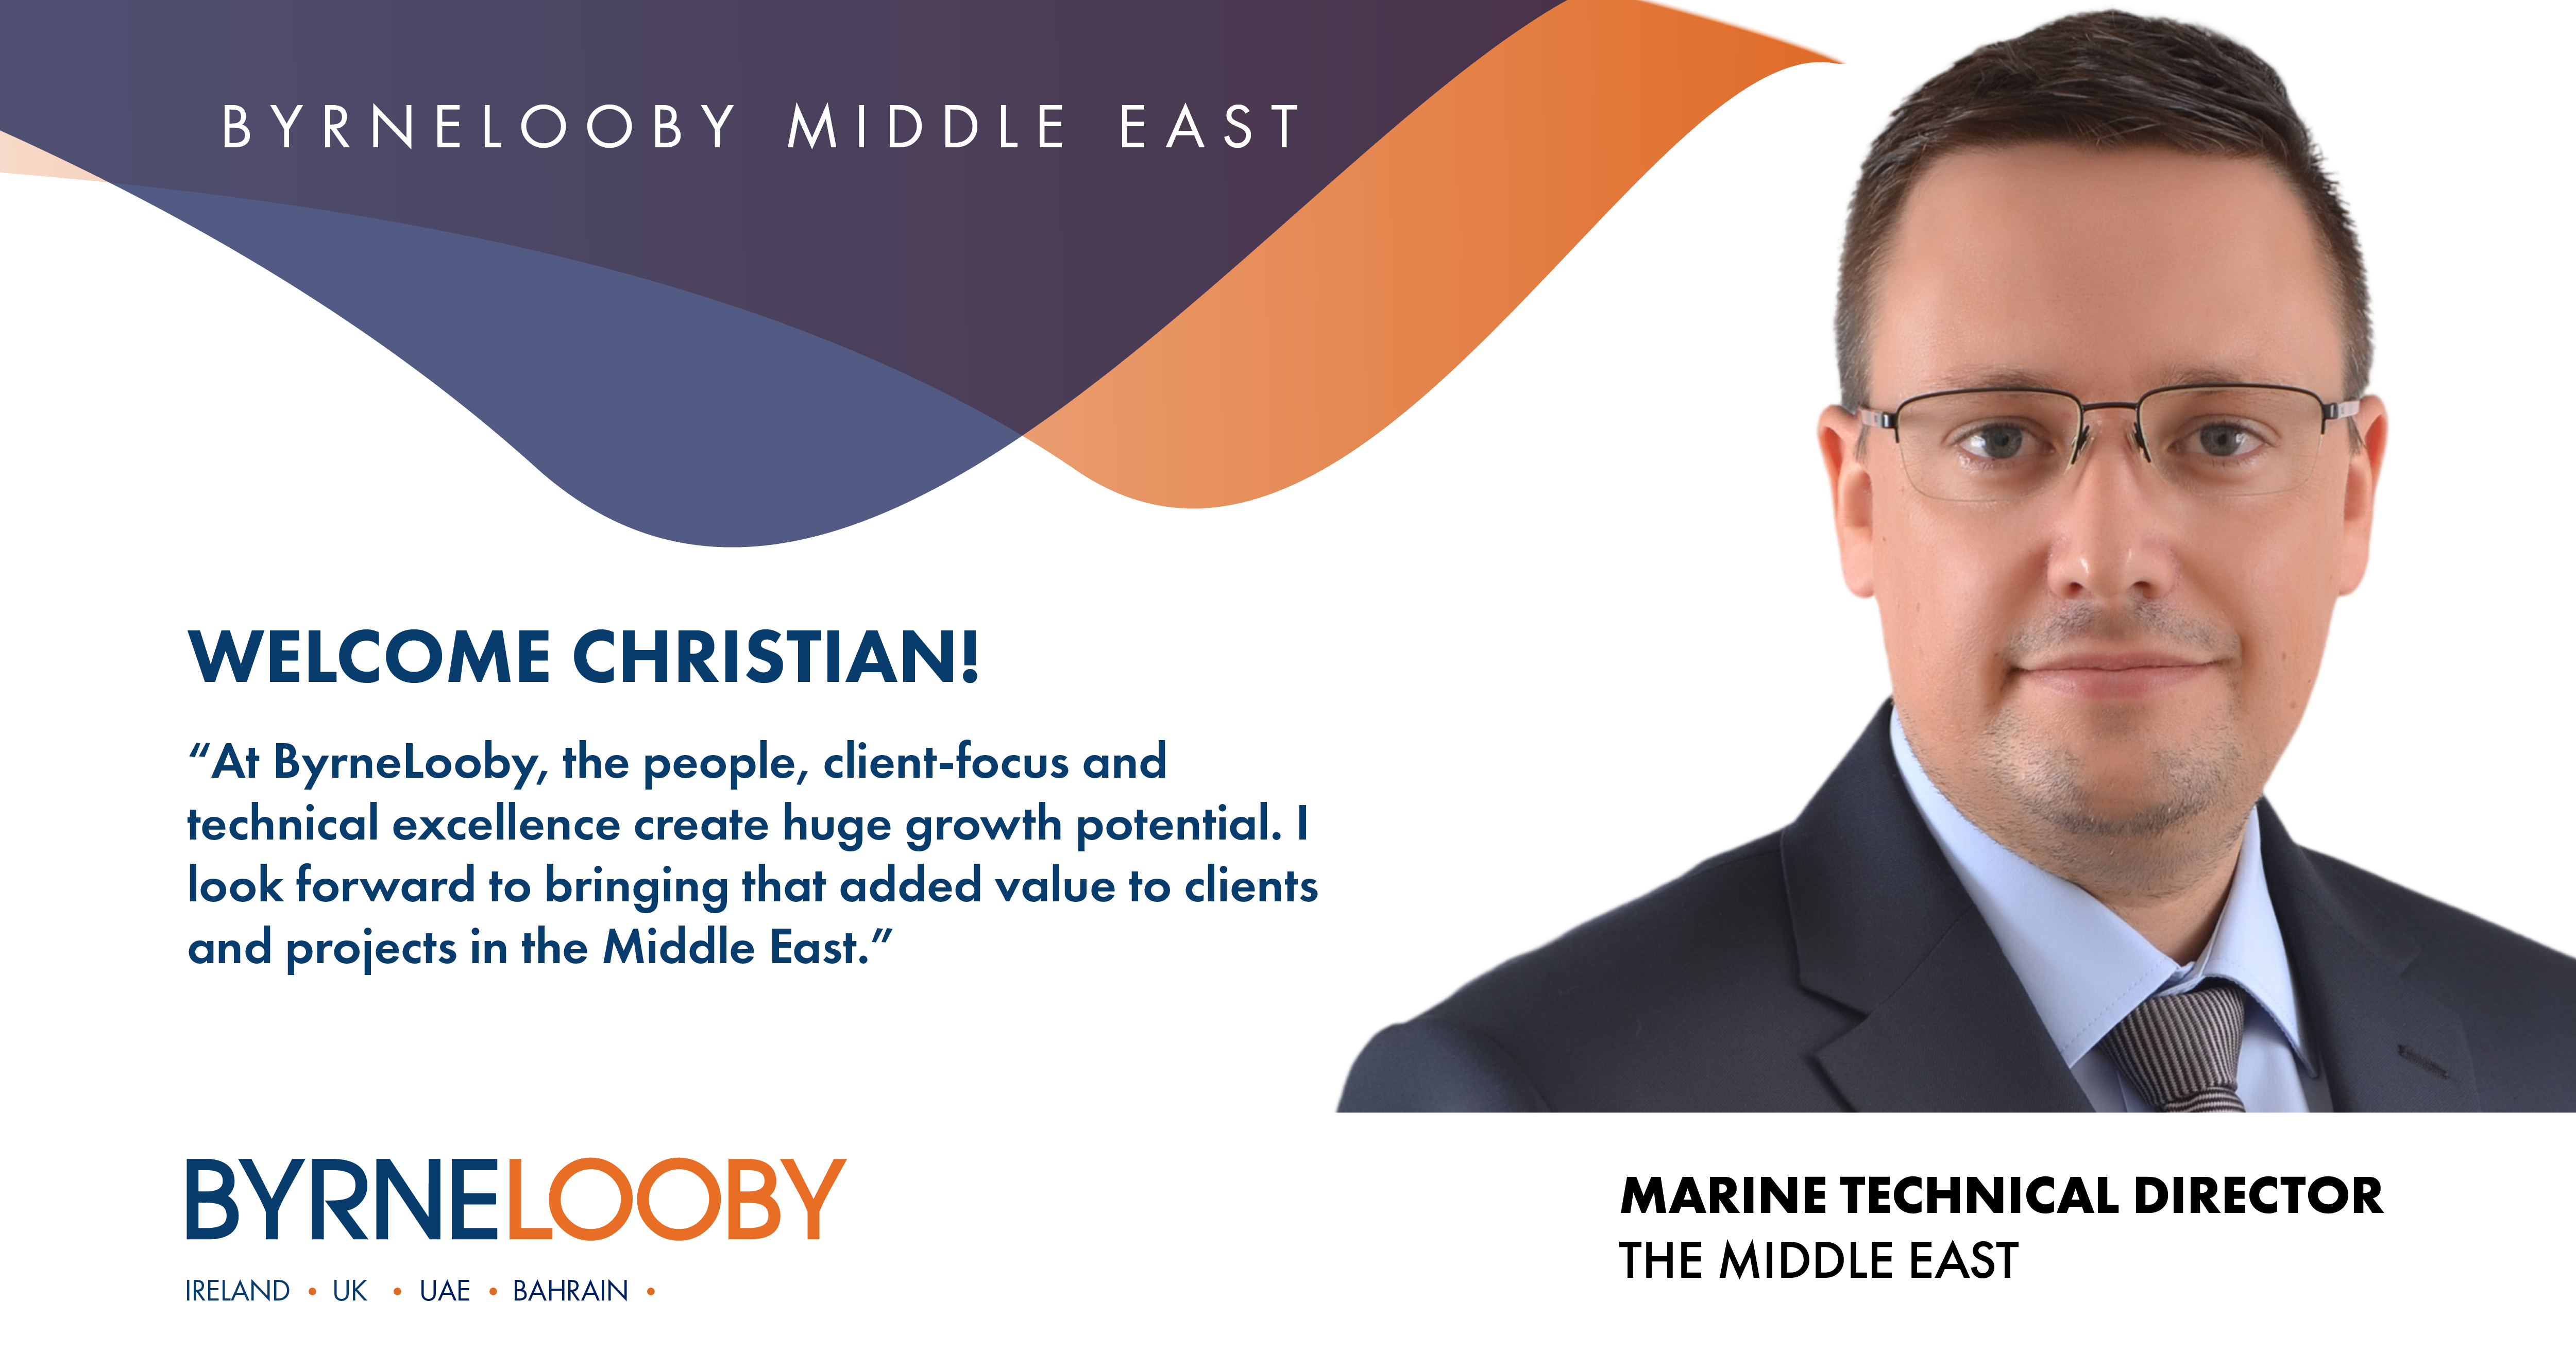 New Marine Technical Director appointed to ByrneLooby Middle East